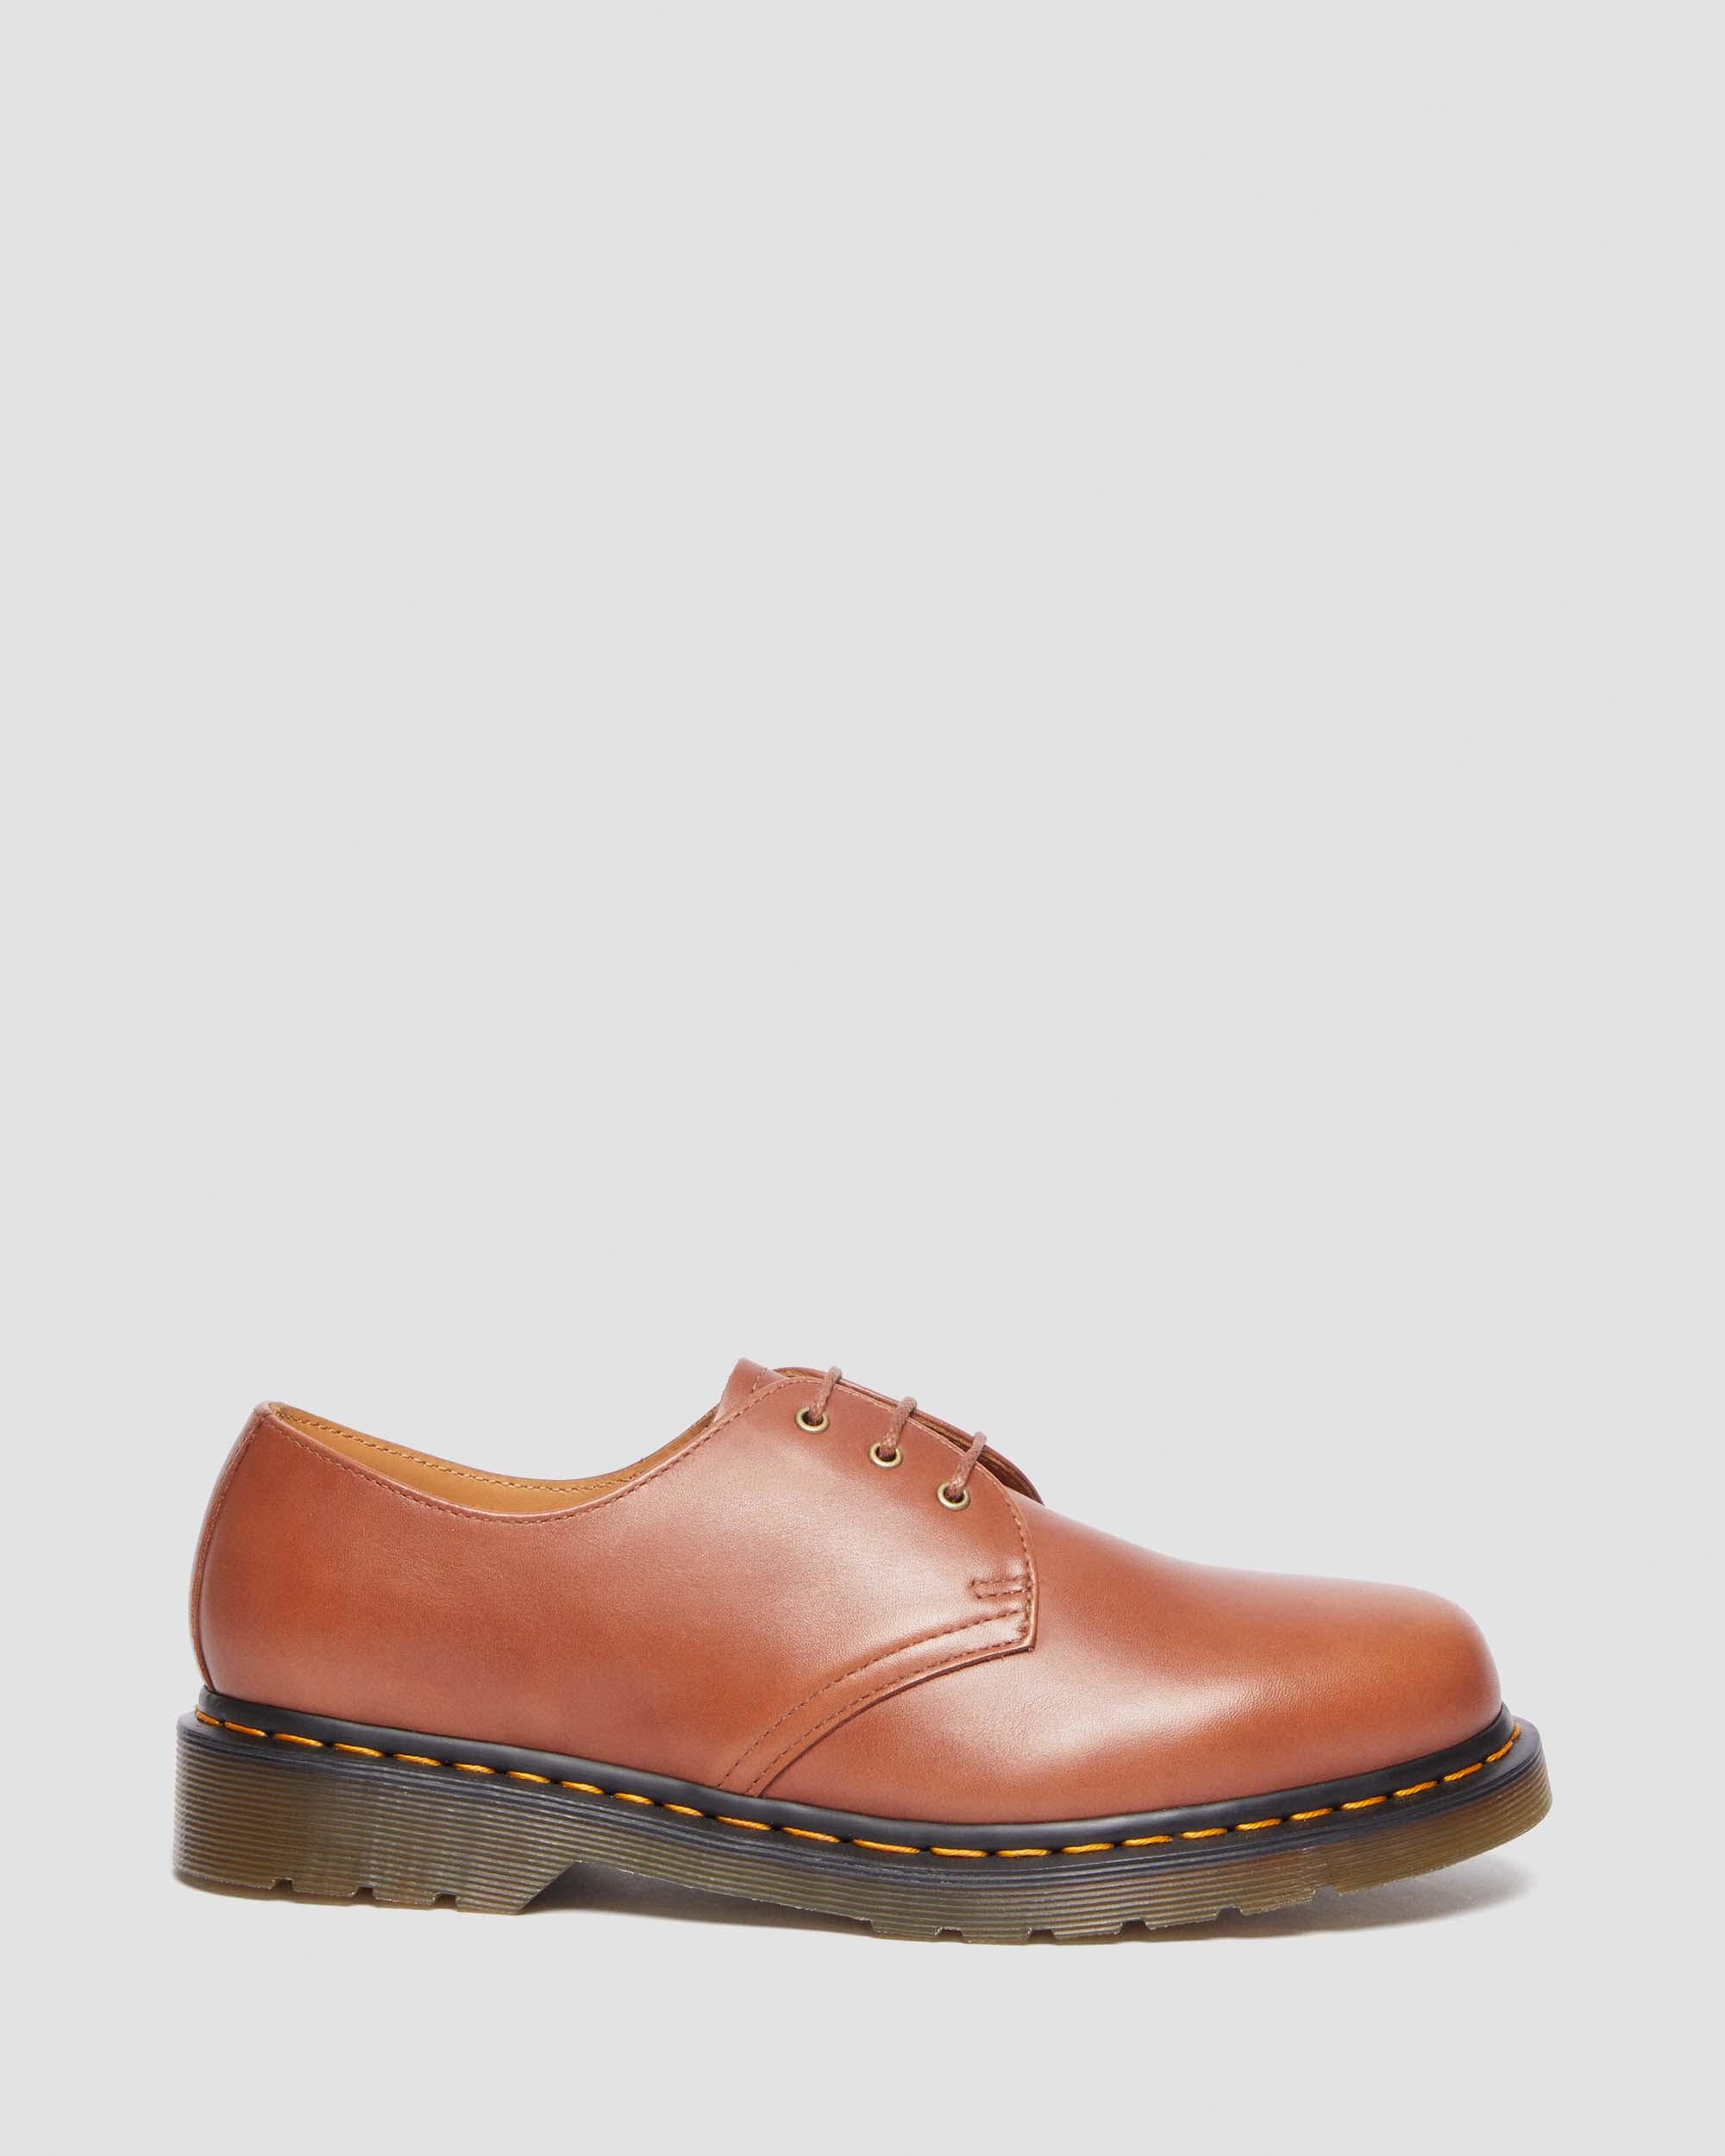 Dr. Martens 1461 Carrara Leather Oxford Shoes In Brown,tan | ModeSens